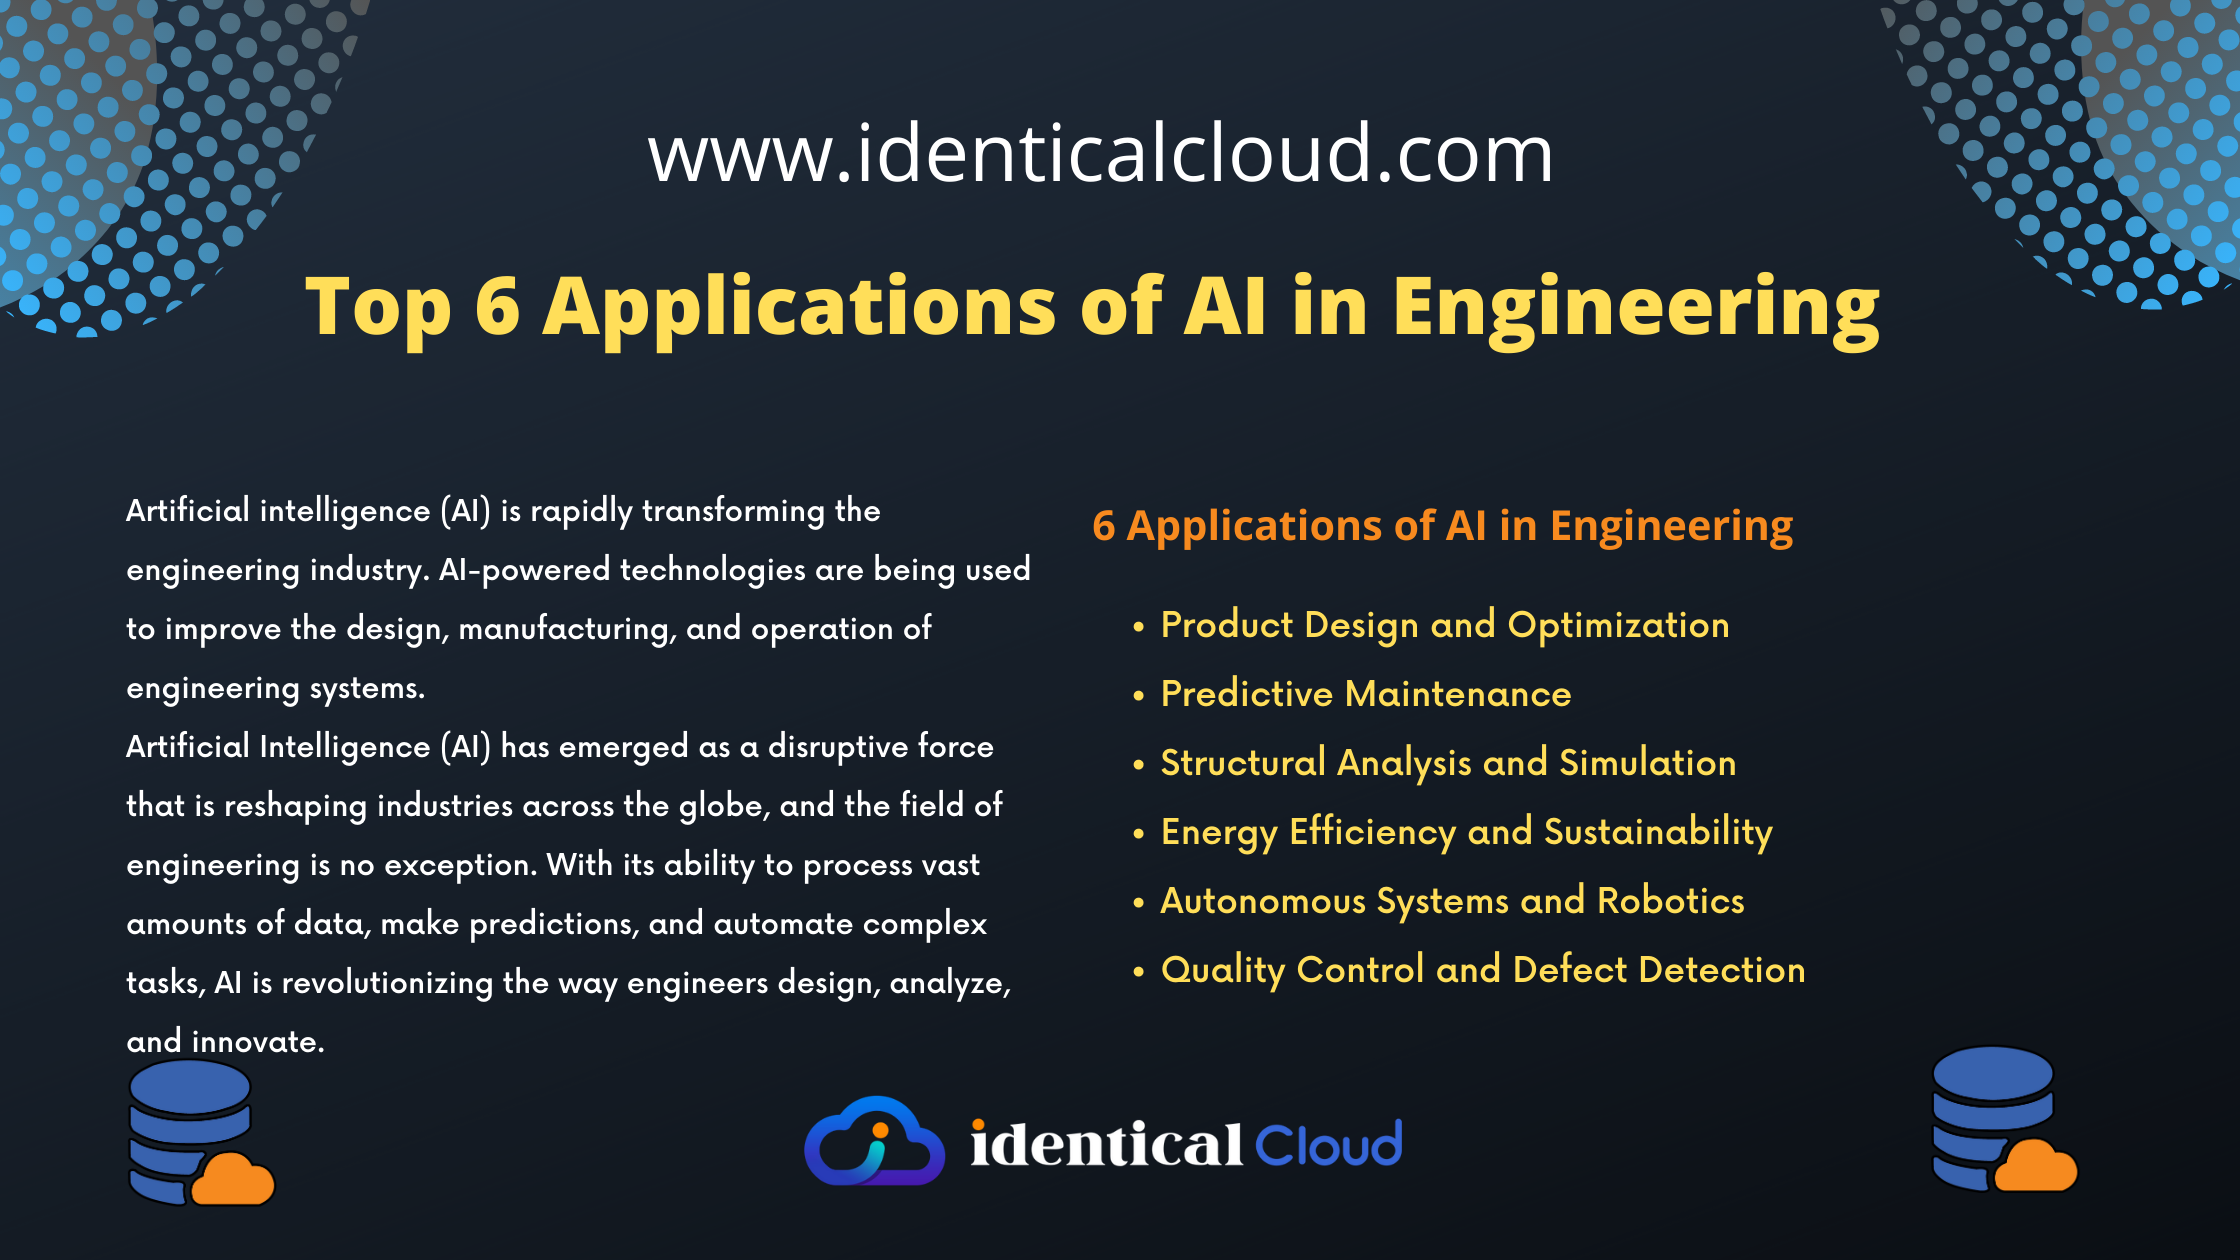 Top 6 Applications of AI in Engineering - identicalcloud.com